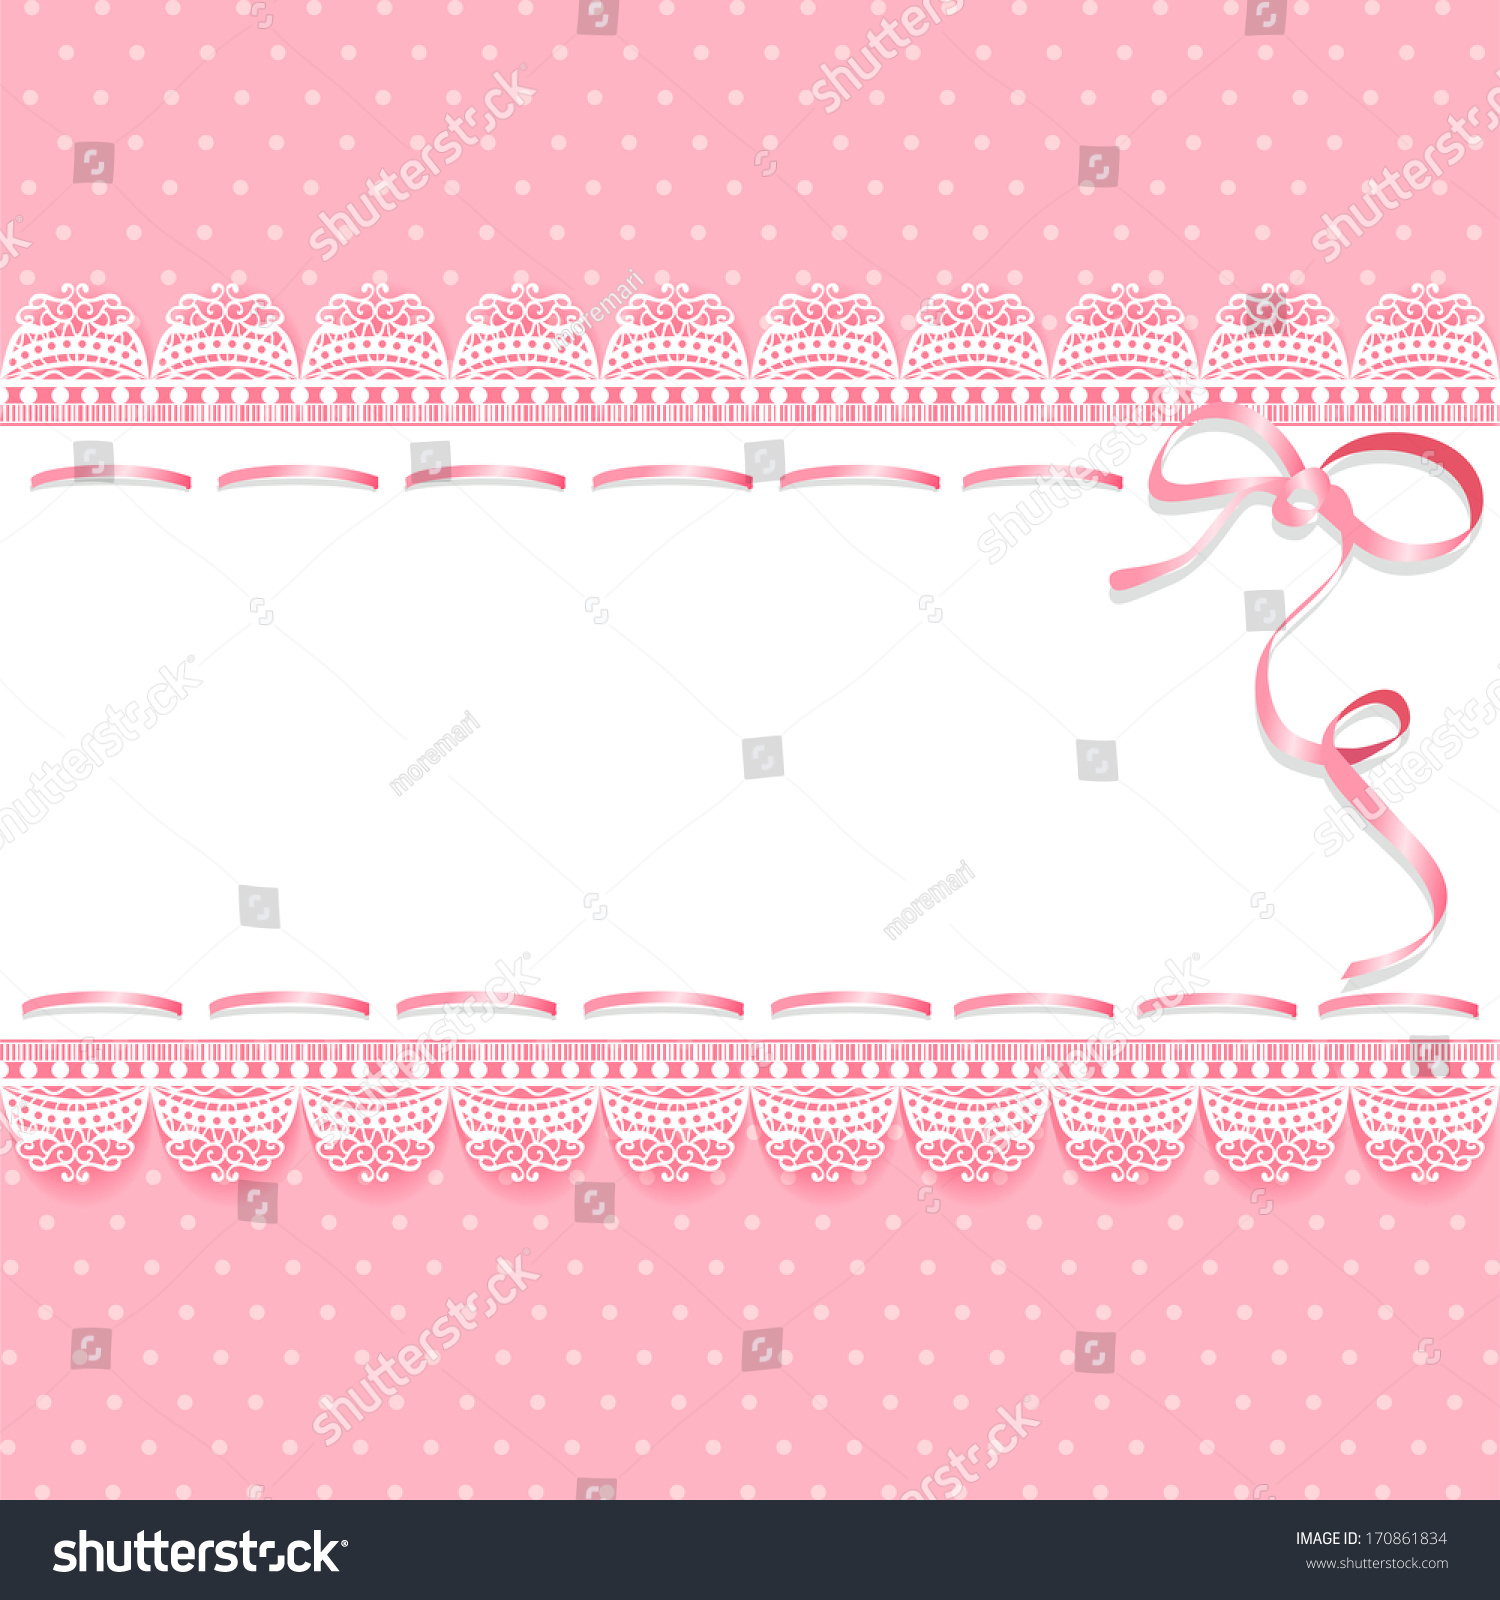 Vintage Lace Pink Background Ribbon Vector Stock Vector 170861834